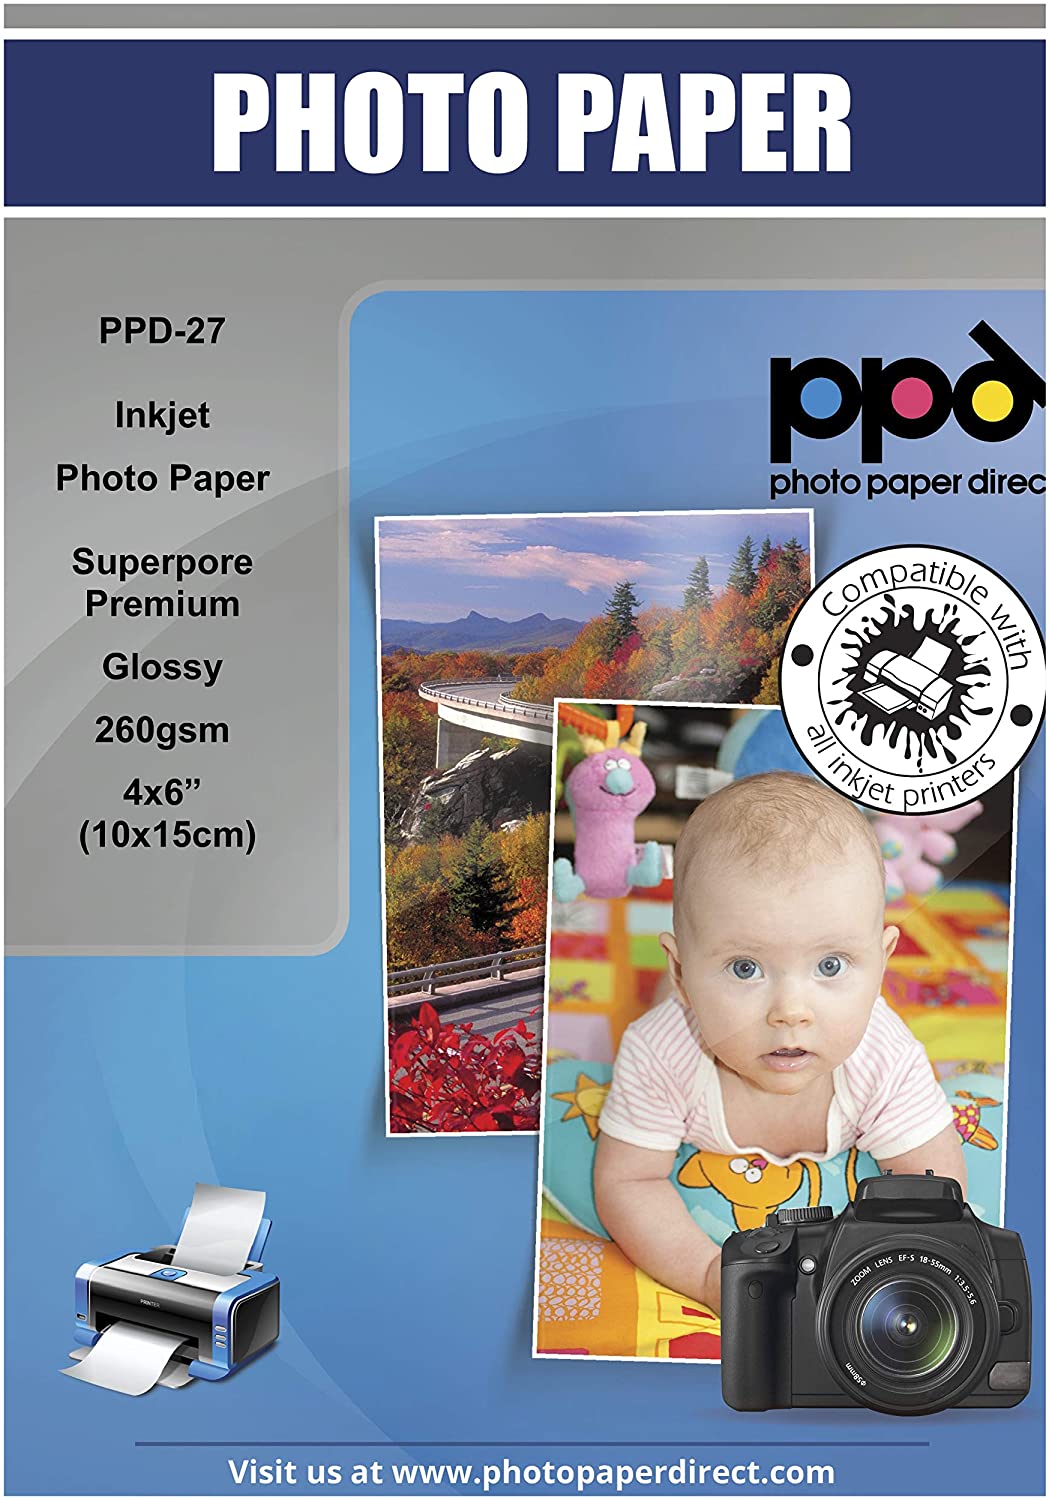 PPD Inkjet 260gsm Photo Paper Glossy Instant Dry Smudge-Proof Waterproof Photo Card Format 4x6" ( 10x15cm) PPD-27